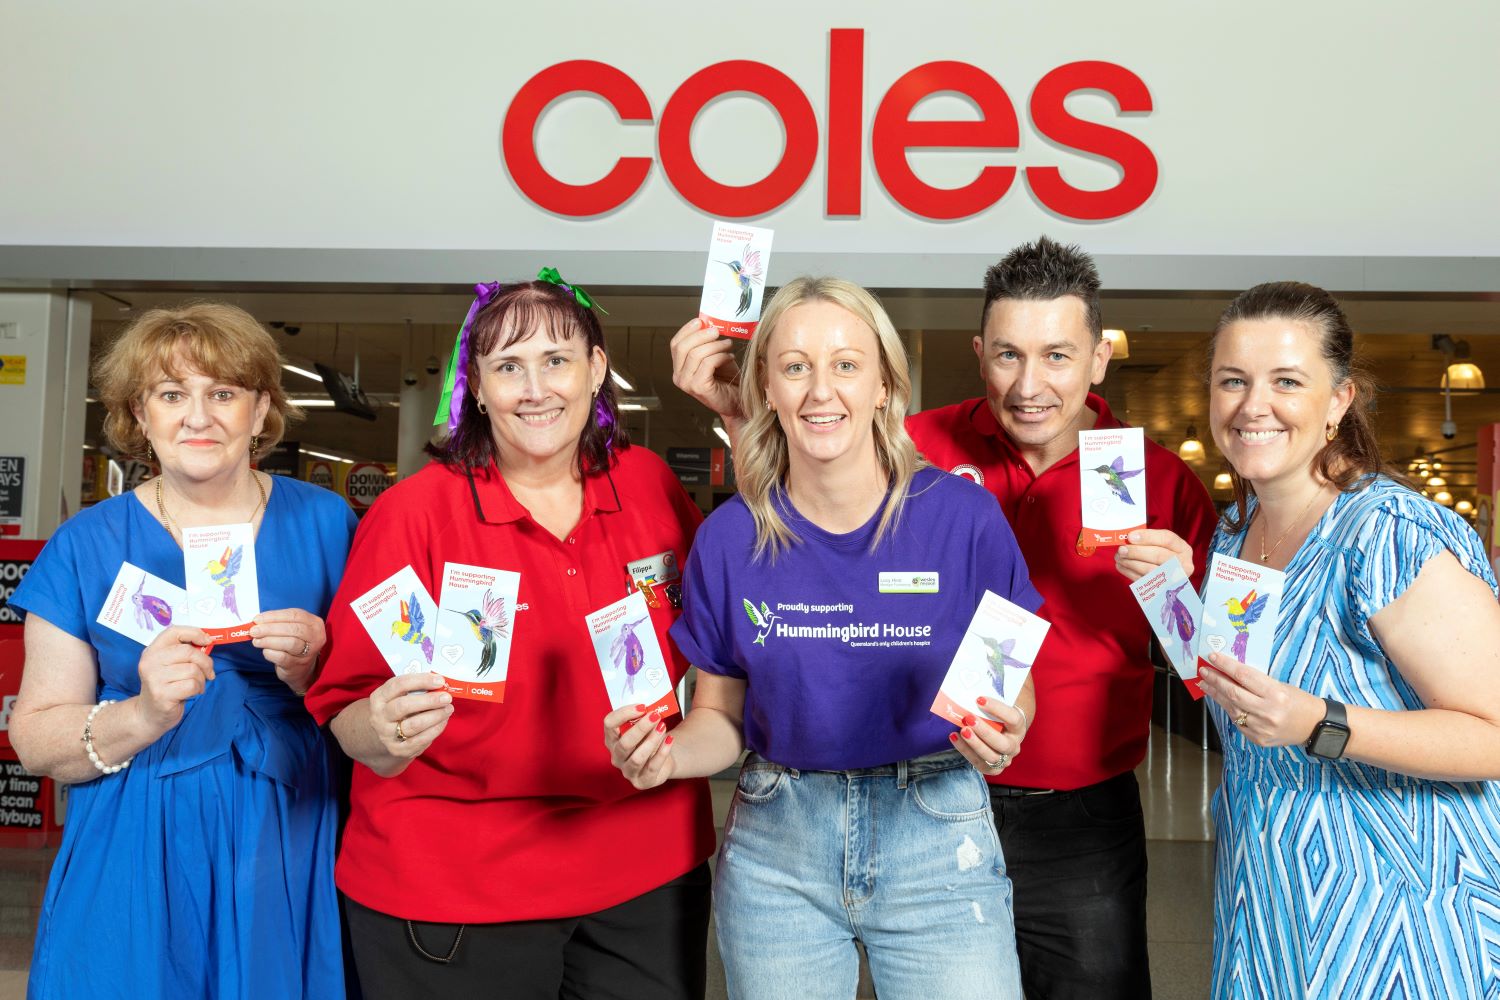 Pictured_Coles team members with Hummingbird House staff_Ellen Whittaker, Filippa Byrne, Lucy Hirst, Nick Bannan and Kelly Oldham